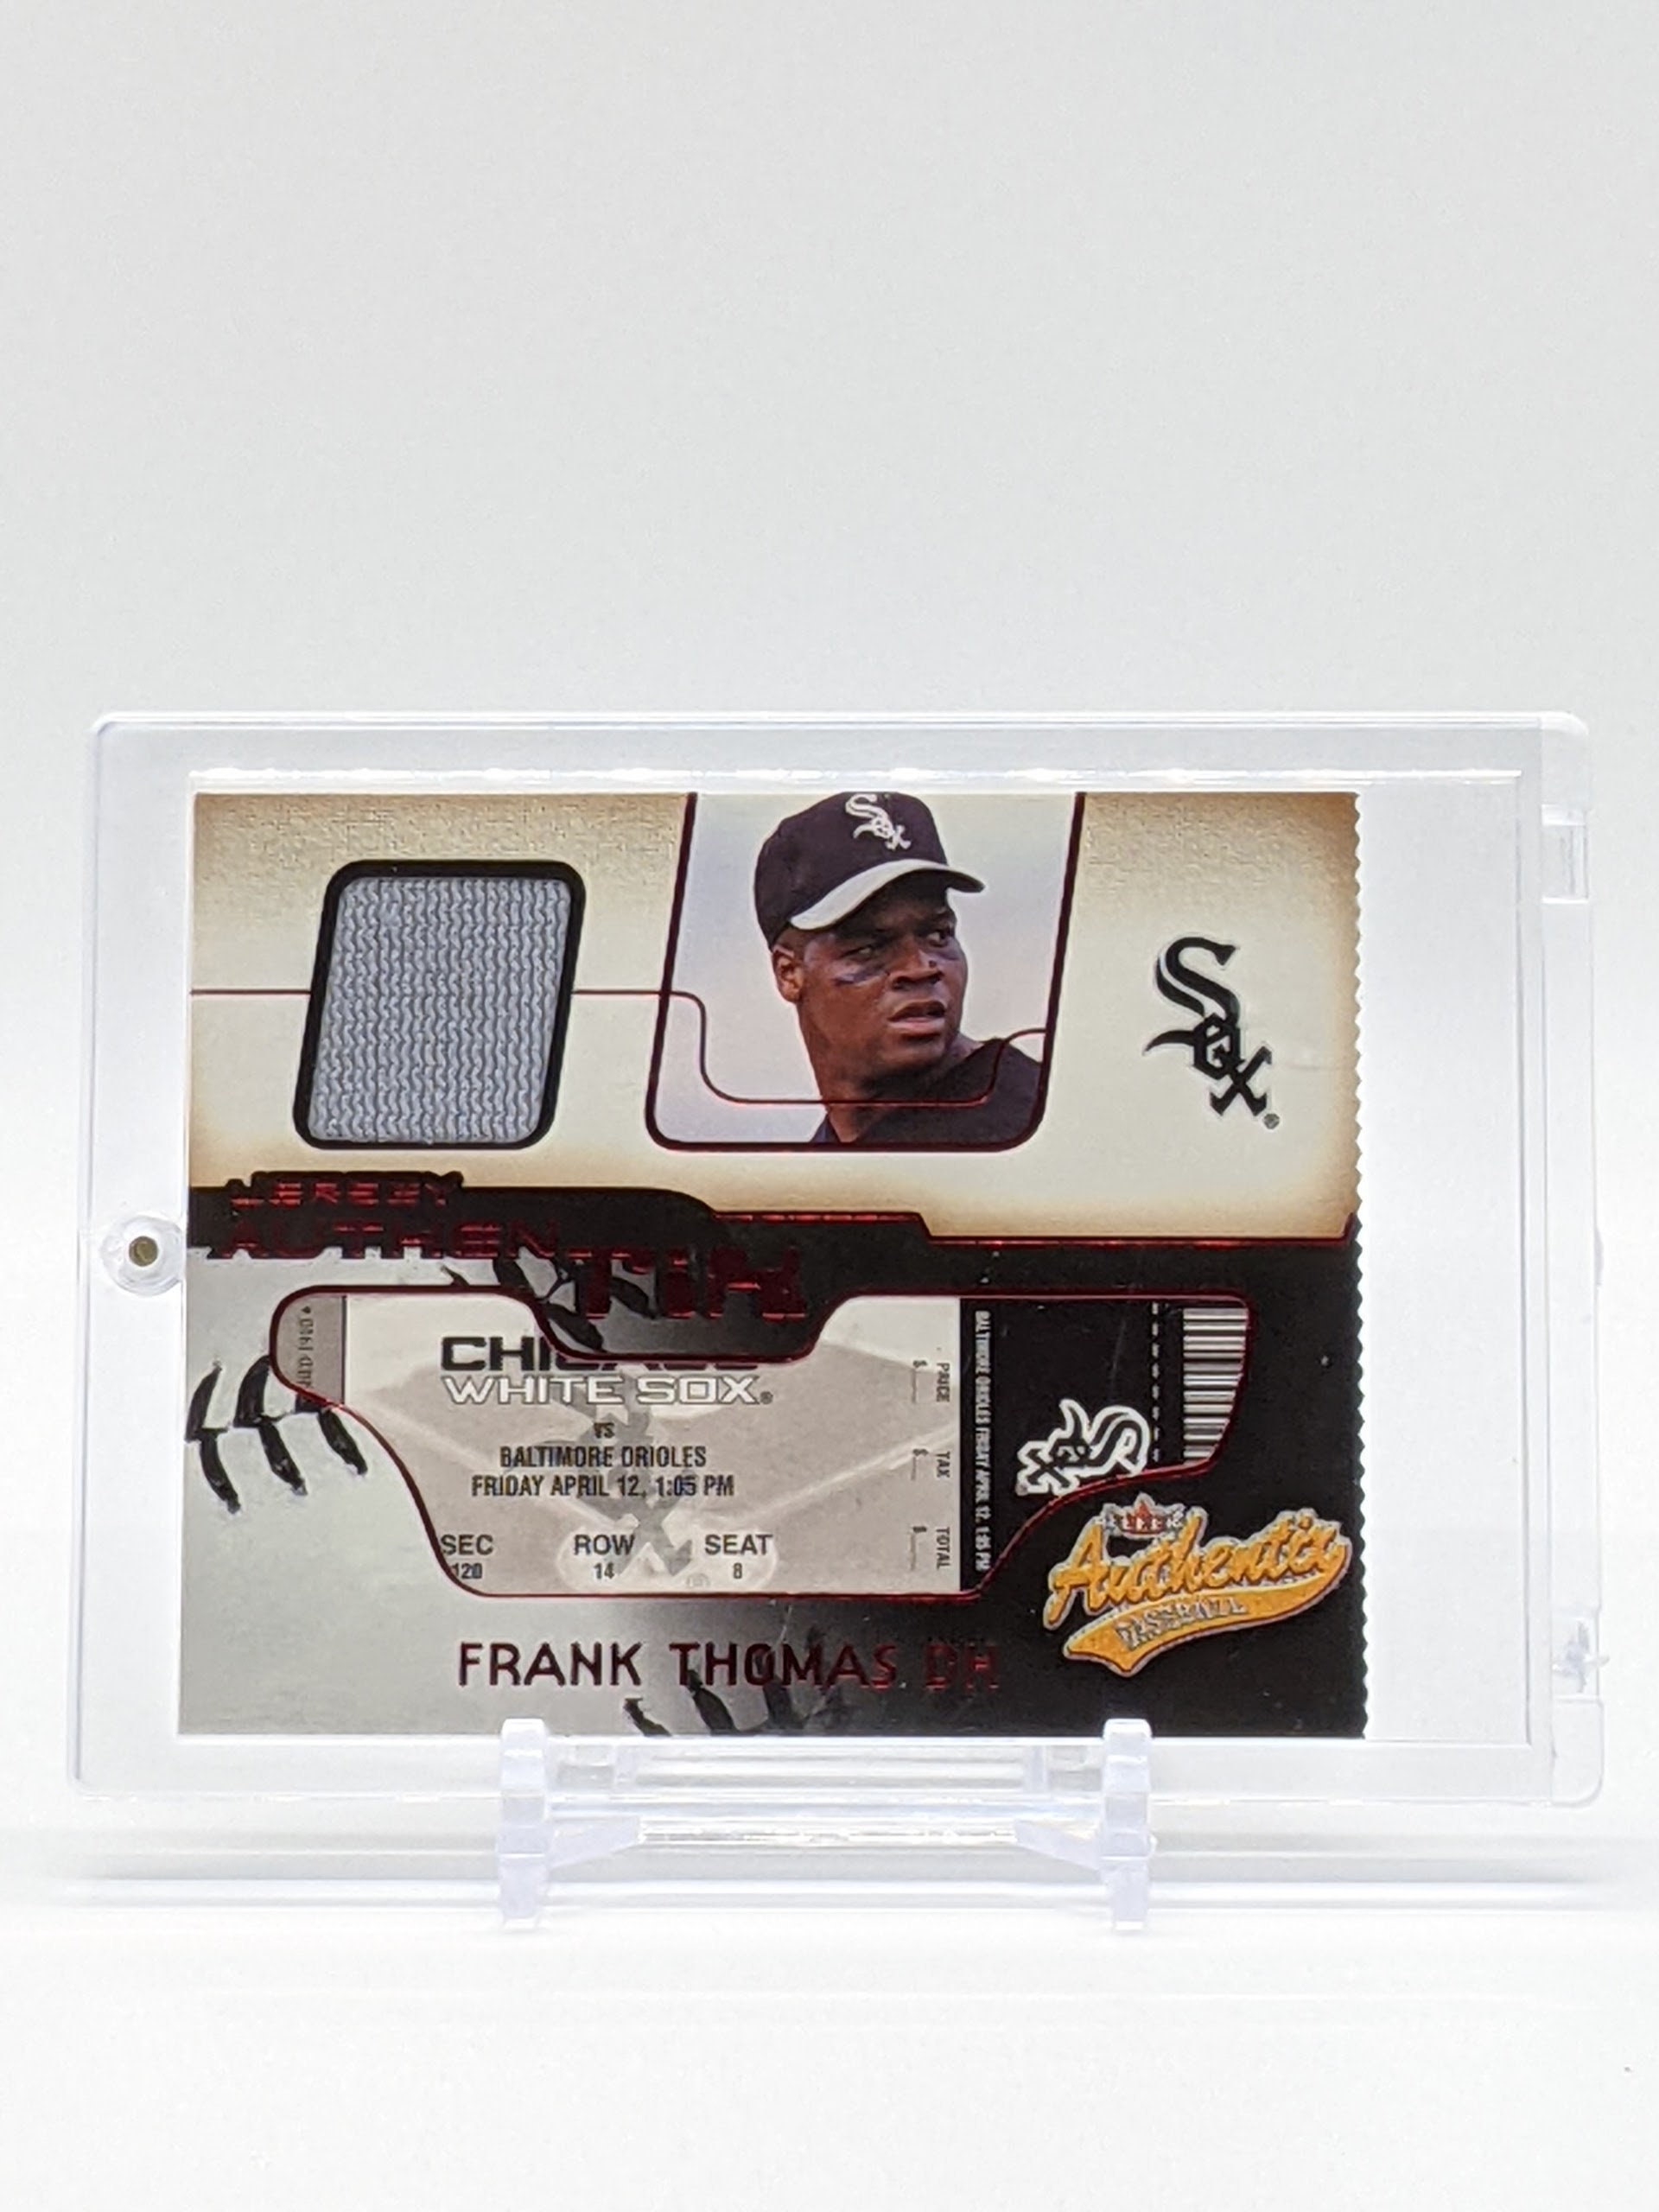 2002 Fleer Frank Thomas Authentix Game Used Jersey Ticket Card 